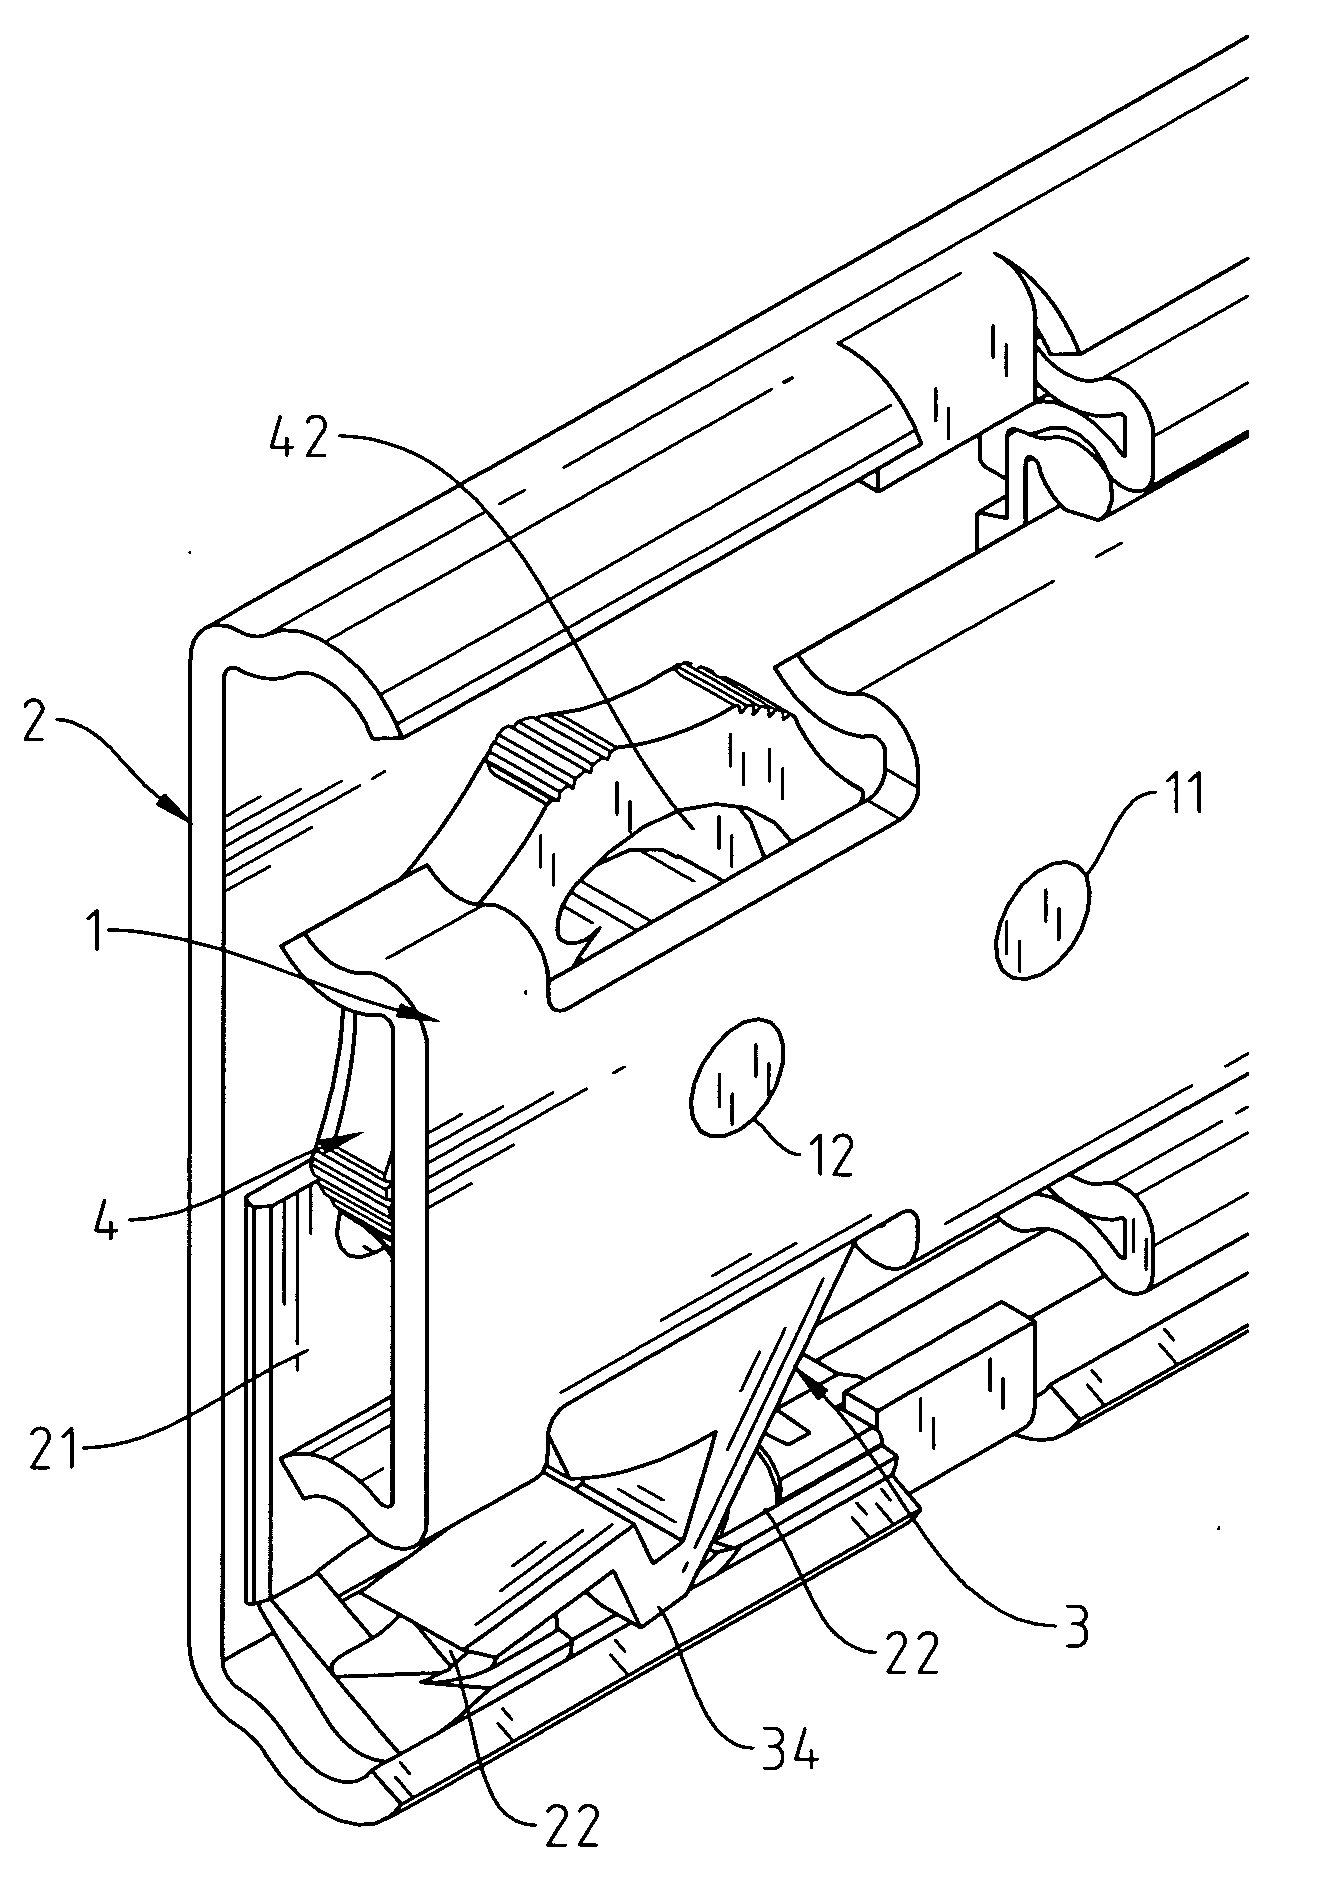 Structure of pull adjustable catch for drawer slide